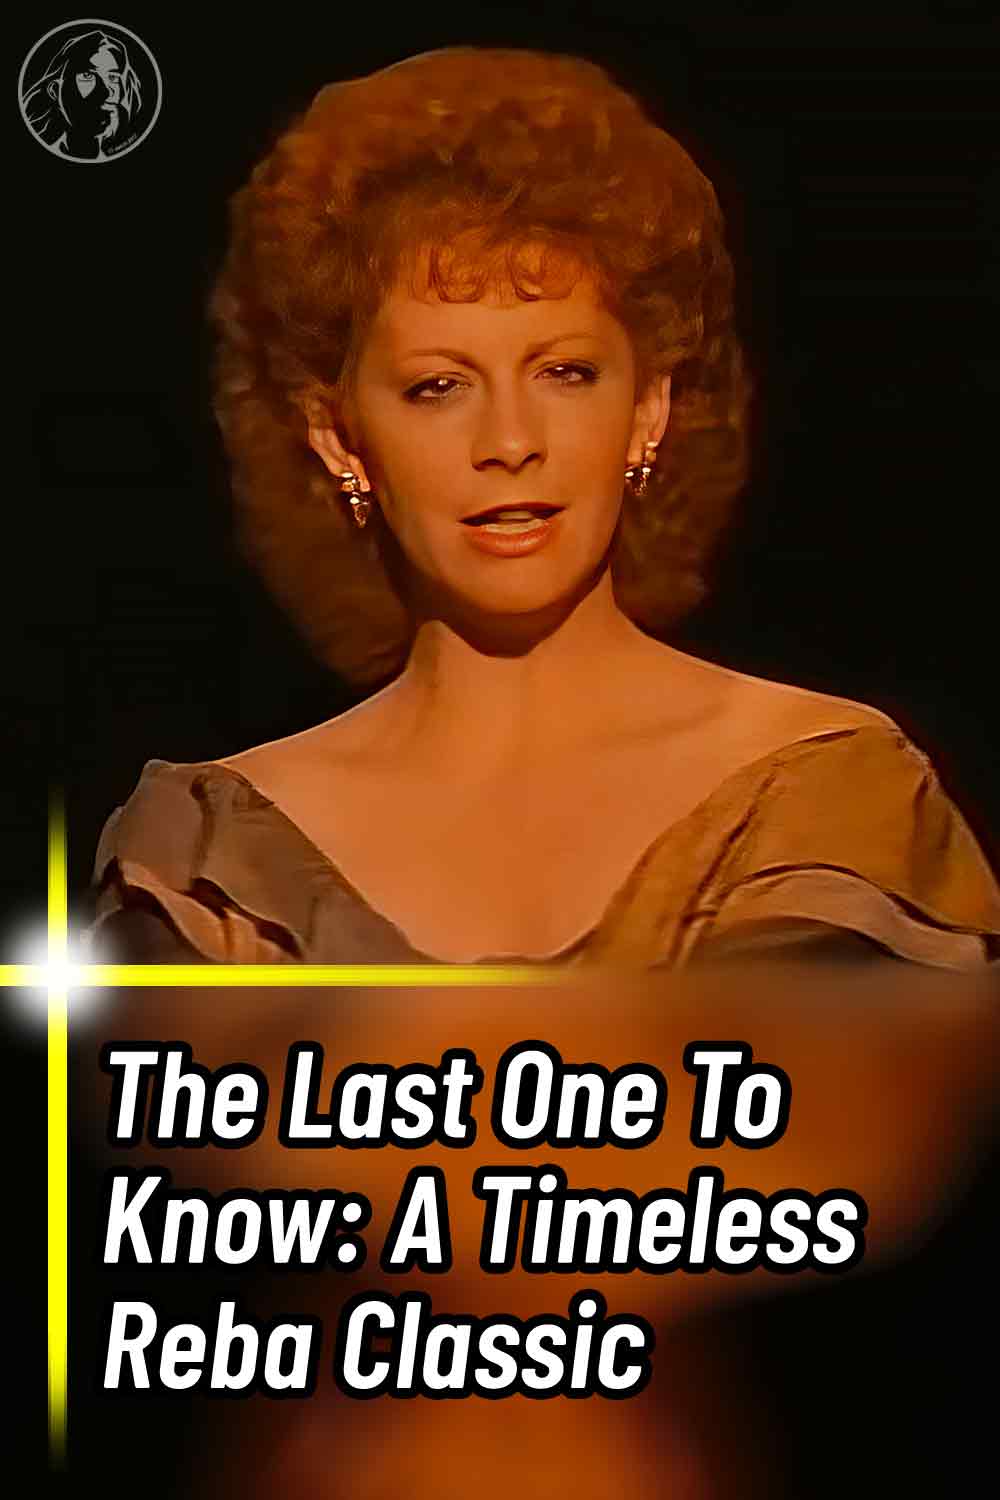 The Last One To Know: A Timeless Reba Classic